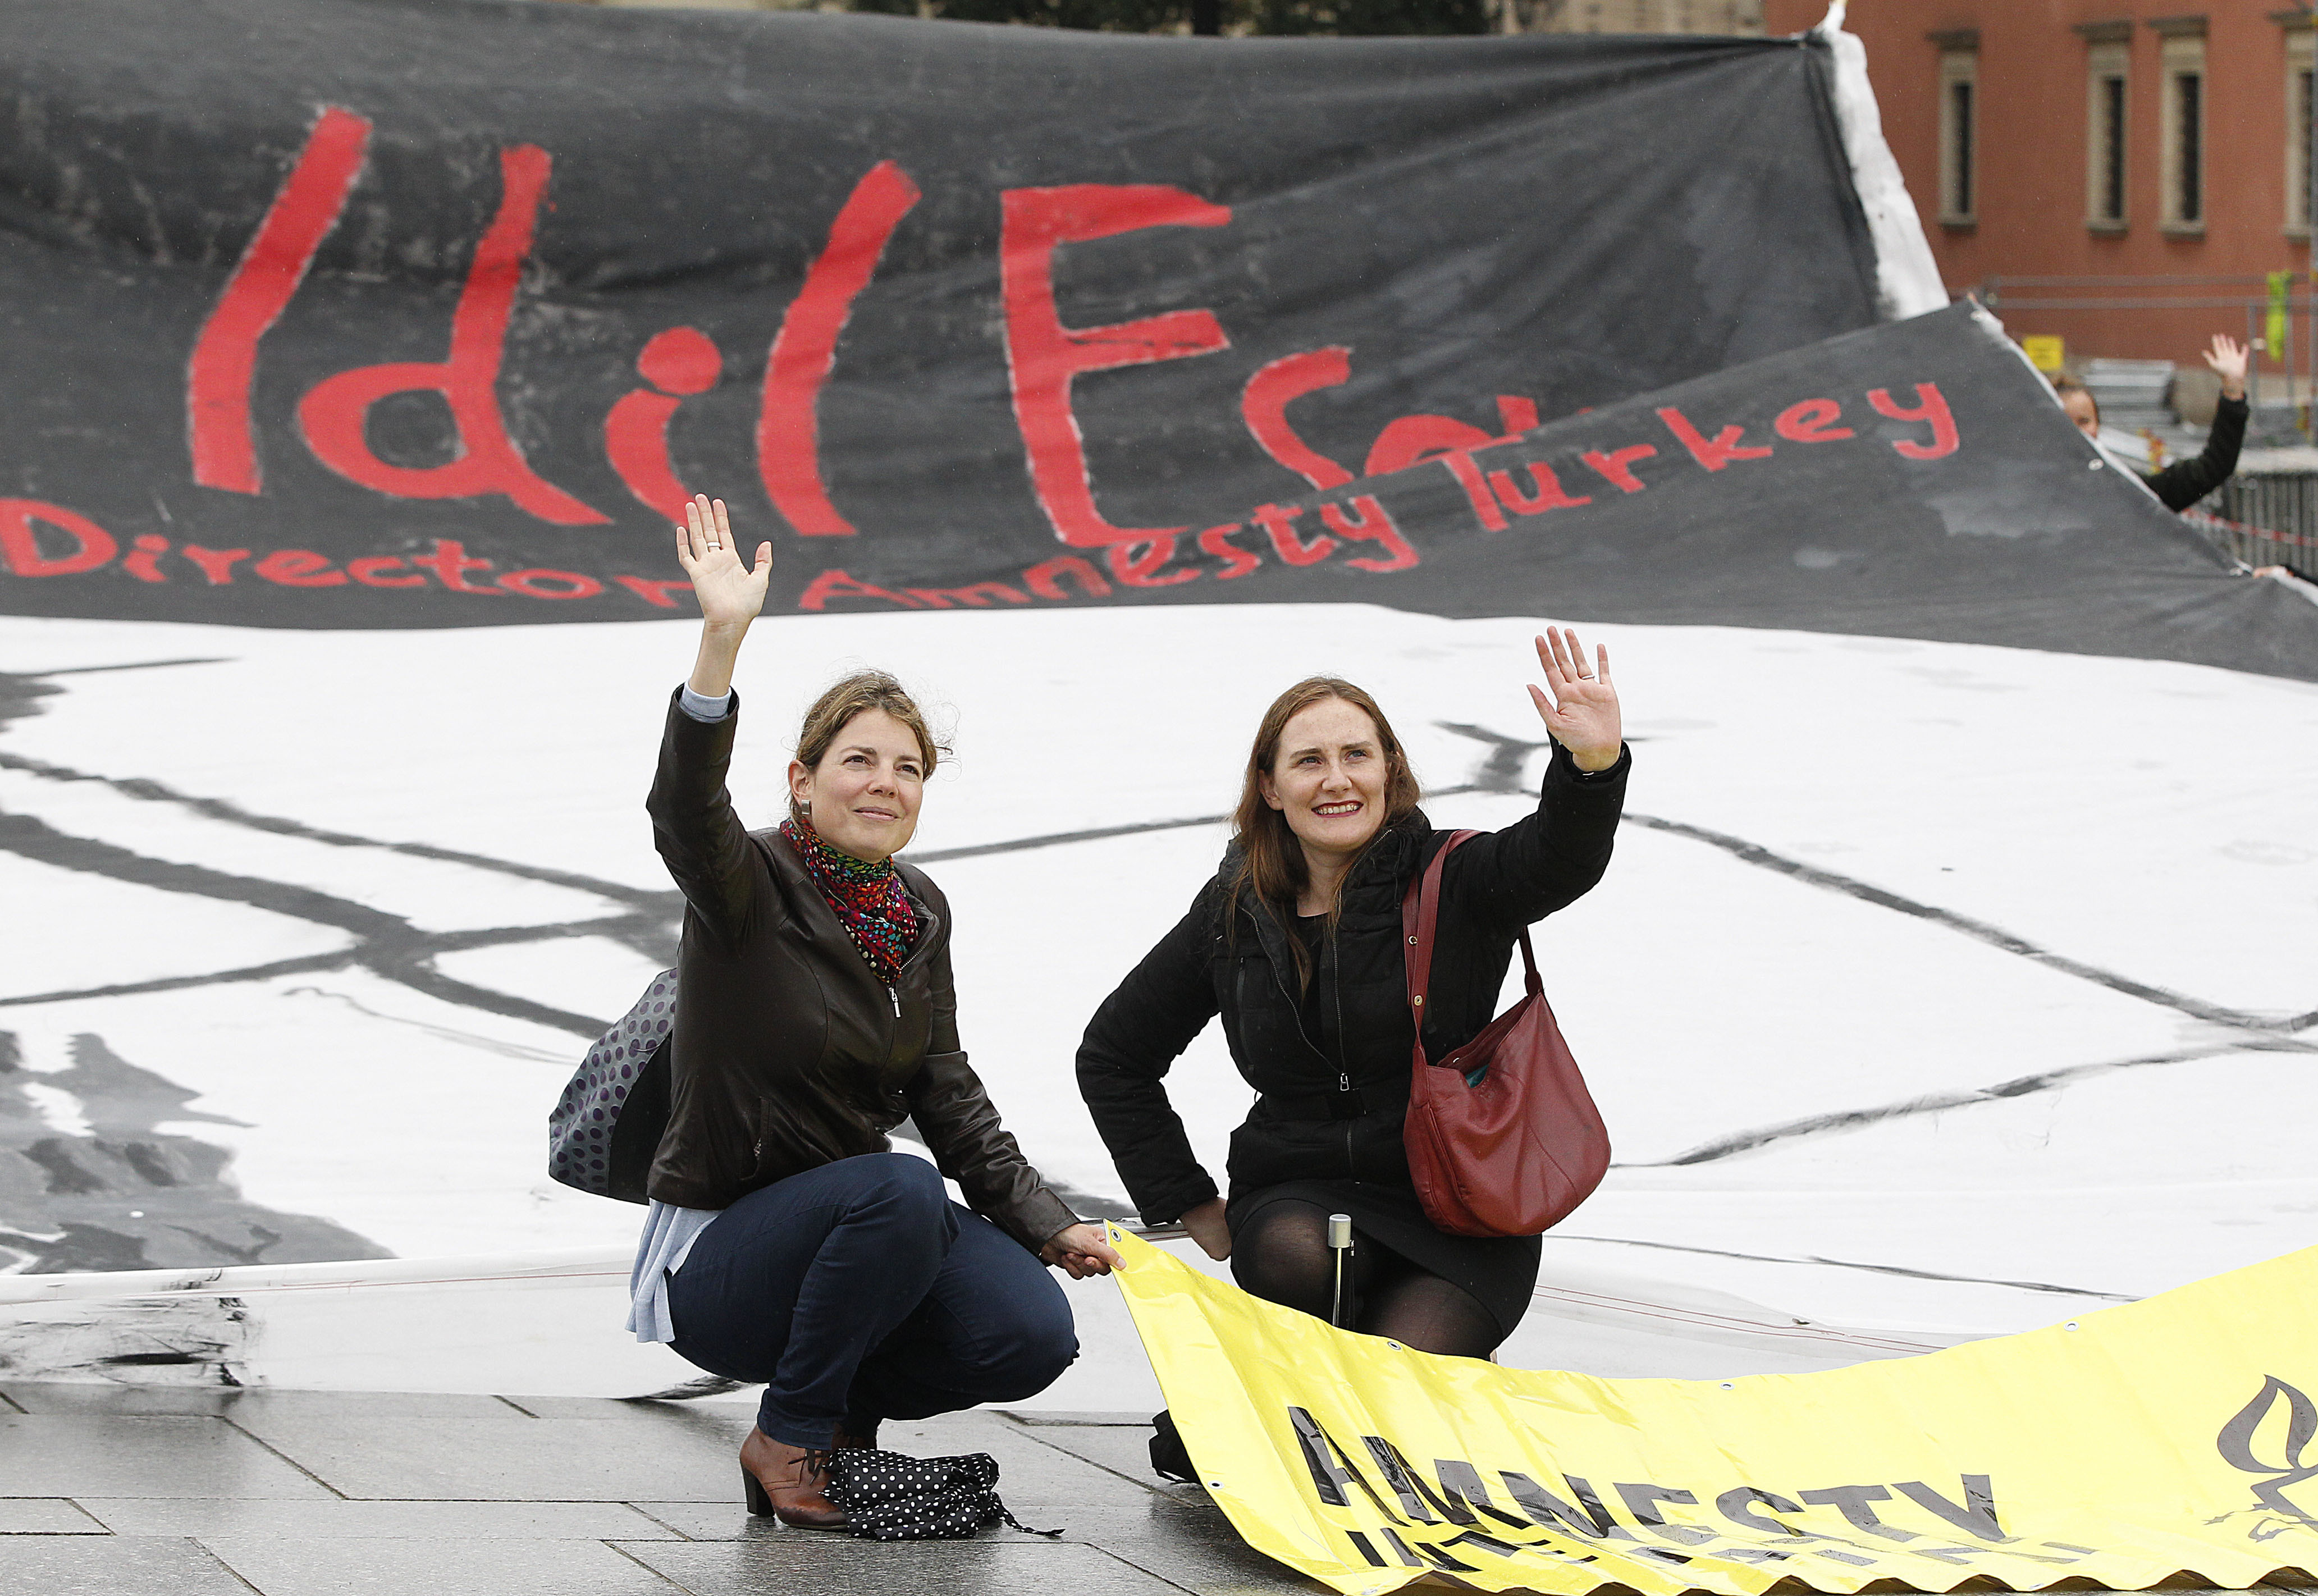 Members of Amnesty International in Poland stage a demonstration demanding the release of Idil Eser, the jailed Turkey director of the human rights organization, in Warsaw, Poland, Wednesday Sept. 20, 2017. The arrest of Eser and several other human rights activists and journalists have added to widespread concerns about the erosion of rights and freedoms in Turkey. (AP Photo/Czarek Sokolowski)